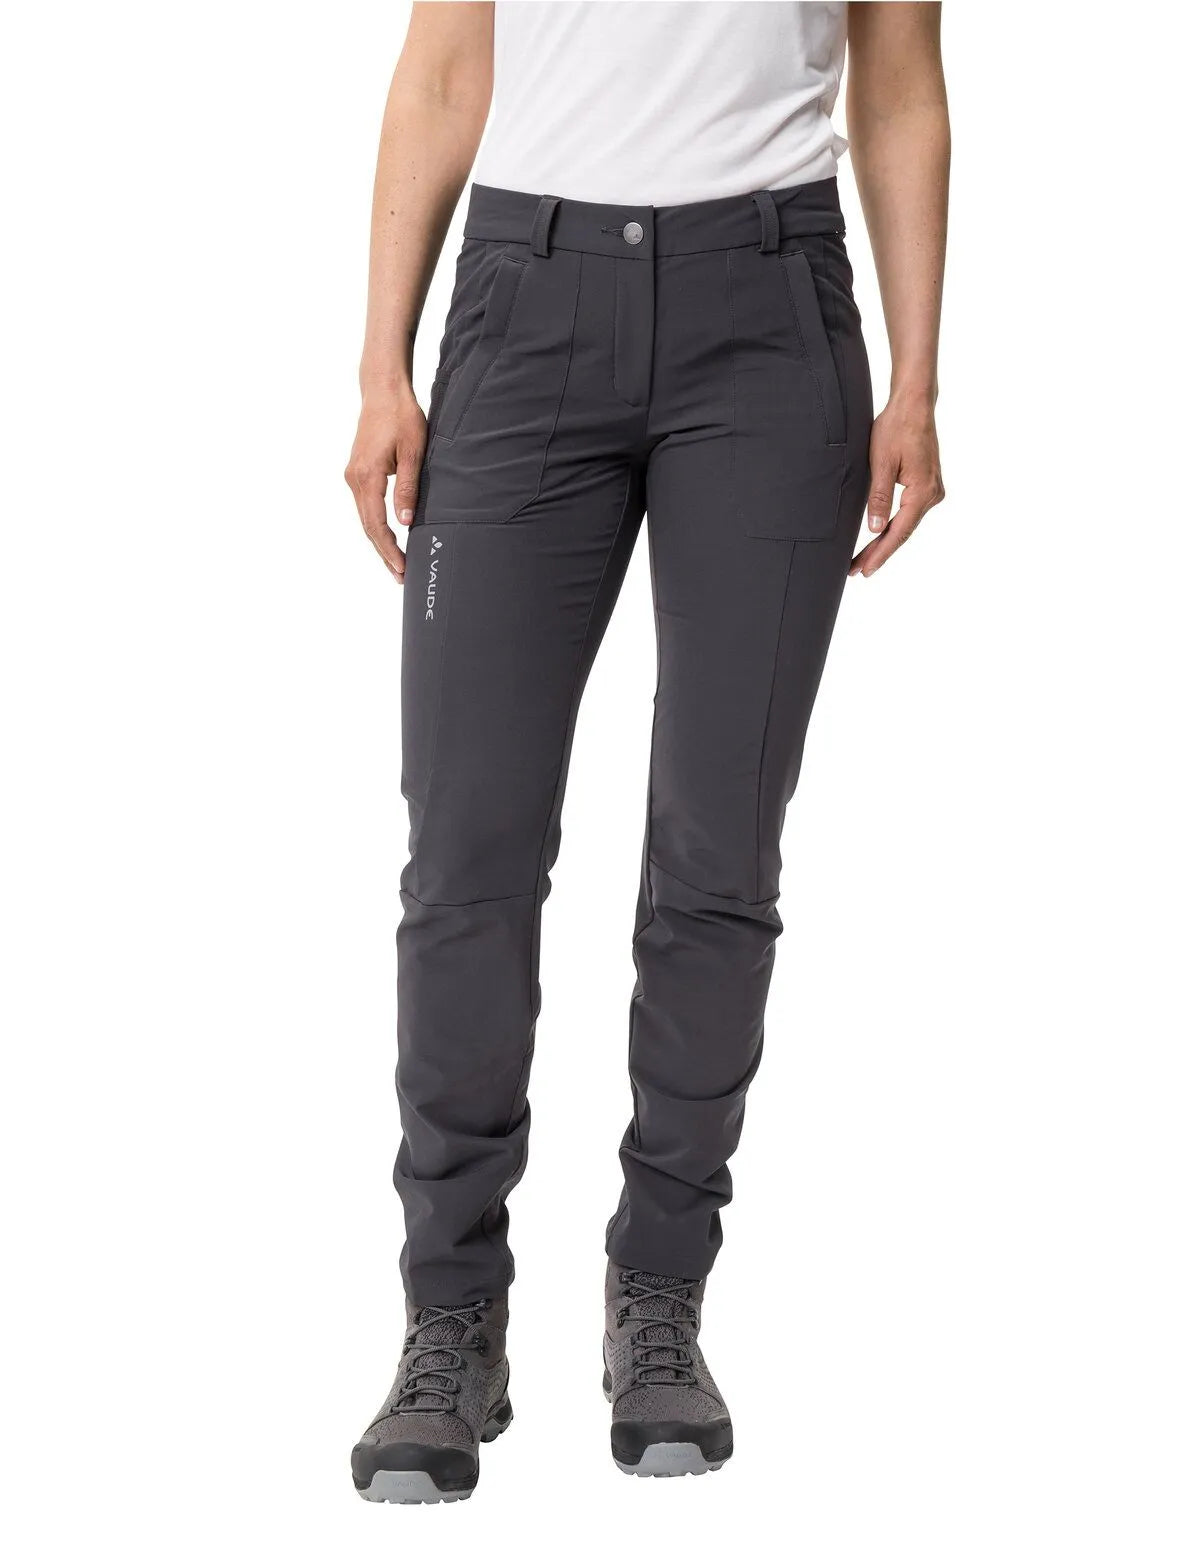 Vaude - W's Elope Slim Fit Outdoor Pants - Recycled polyester & polyester - Weekendbee - sustainable sportswear